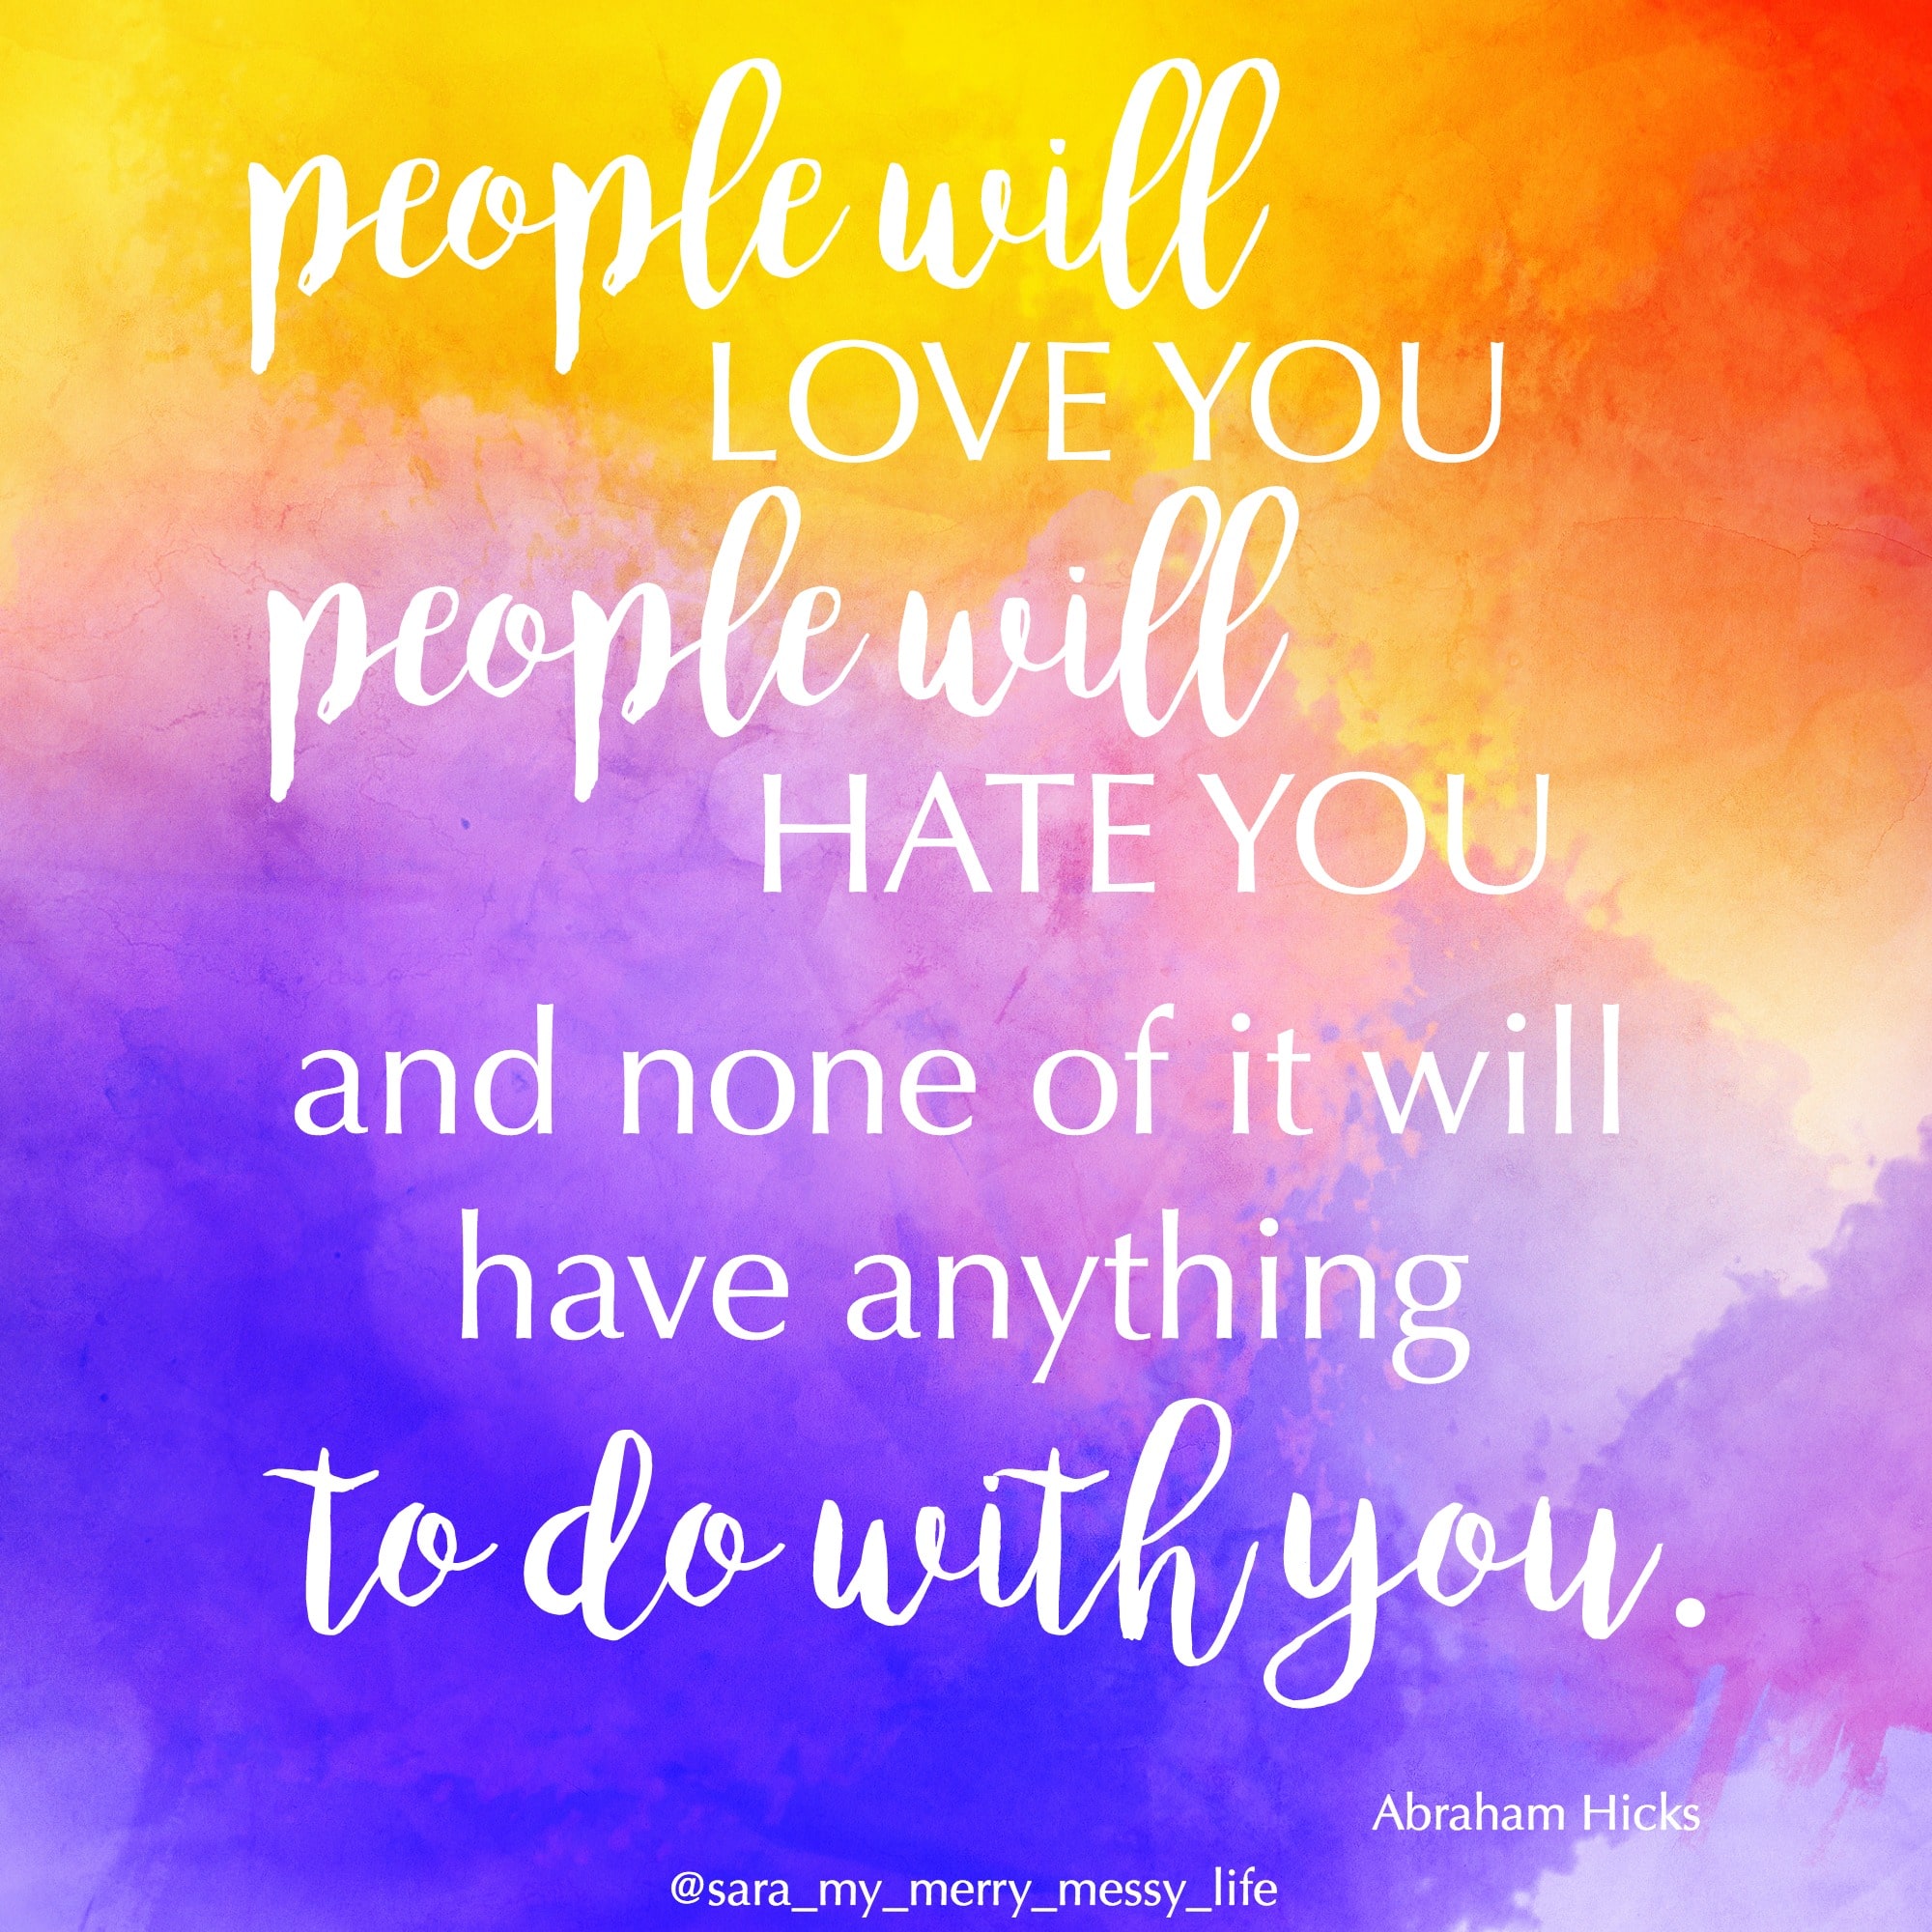 People will love you. People will hate you. And none of it will have anything to do with you. - Abraham Hicks